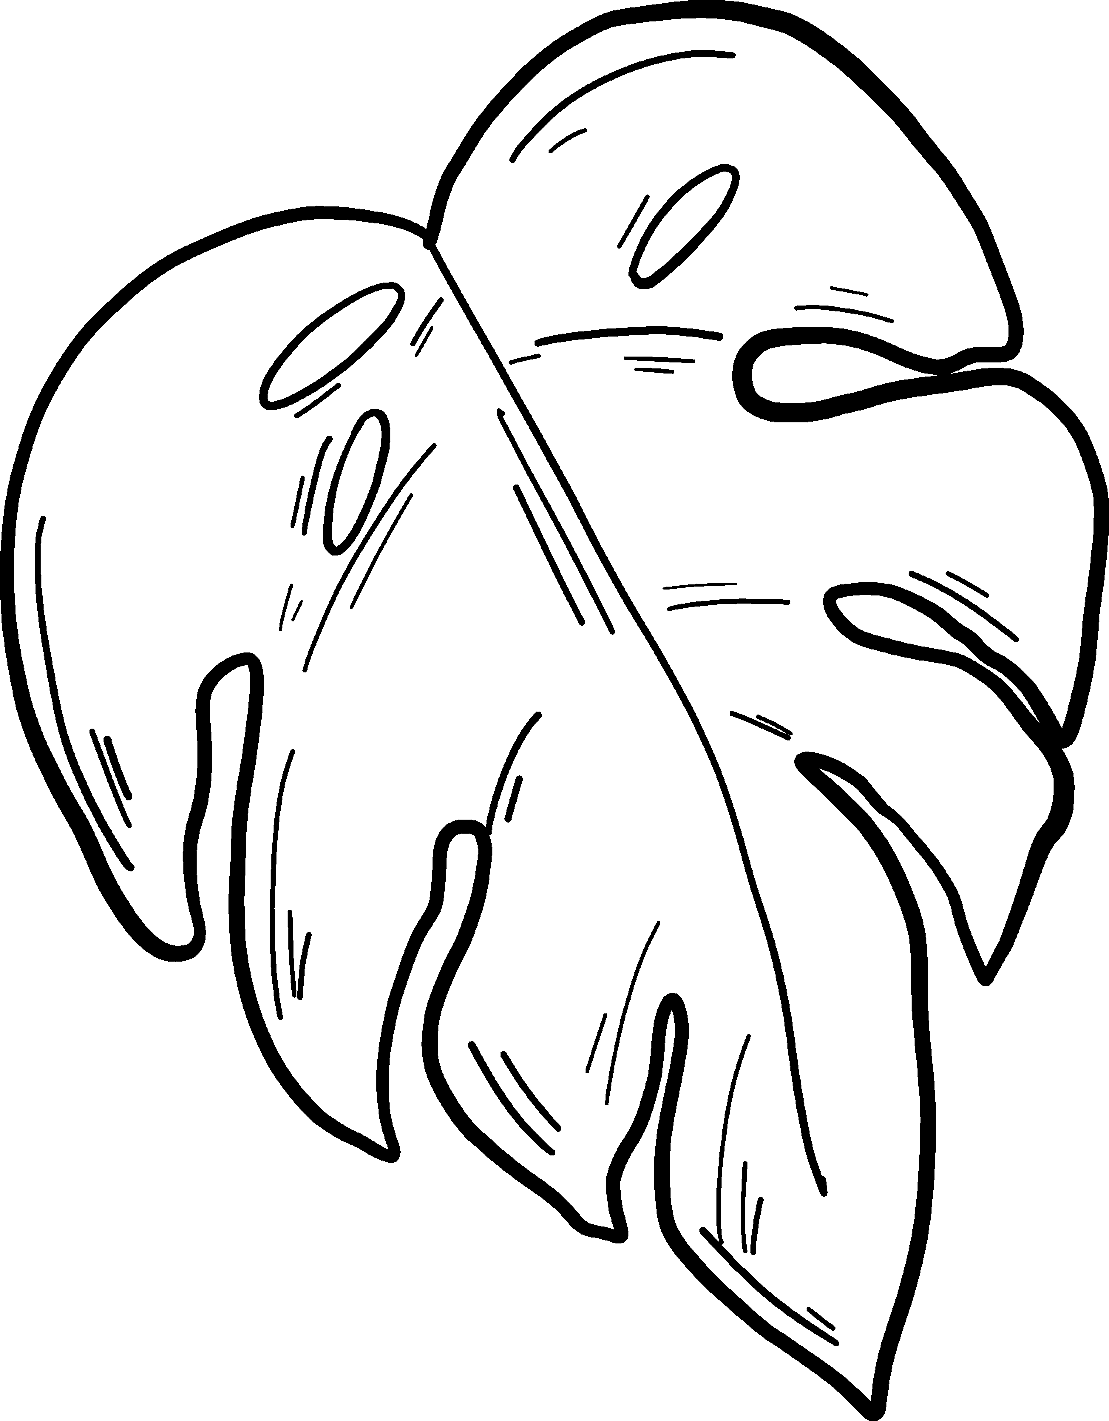 Palm leaf to print coloring page